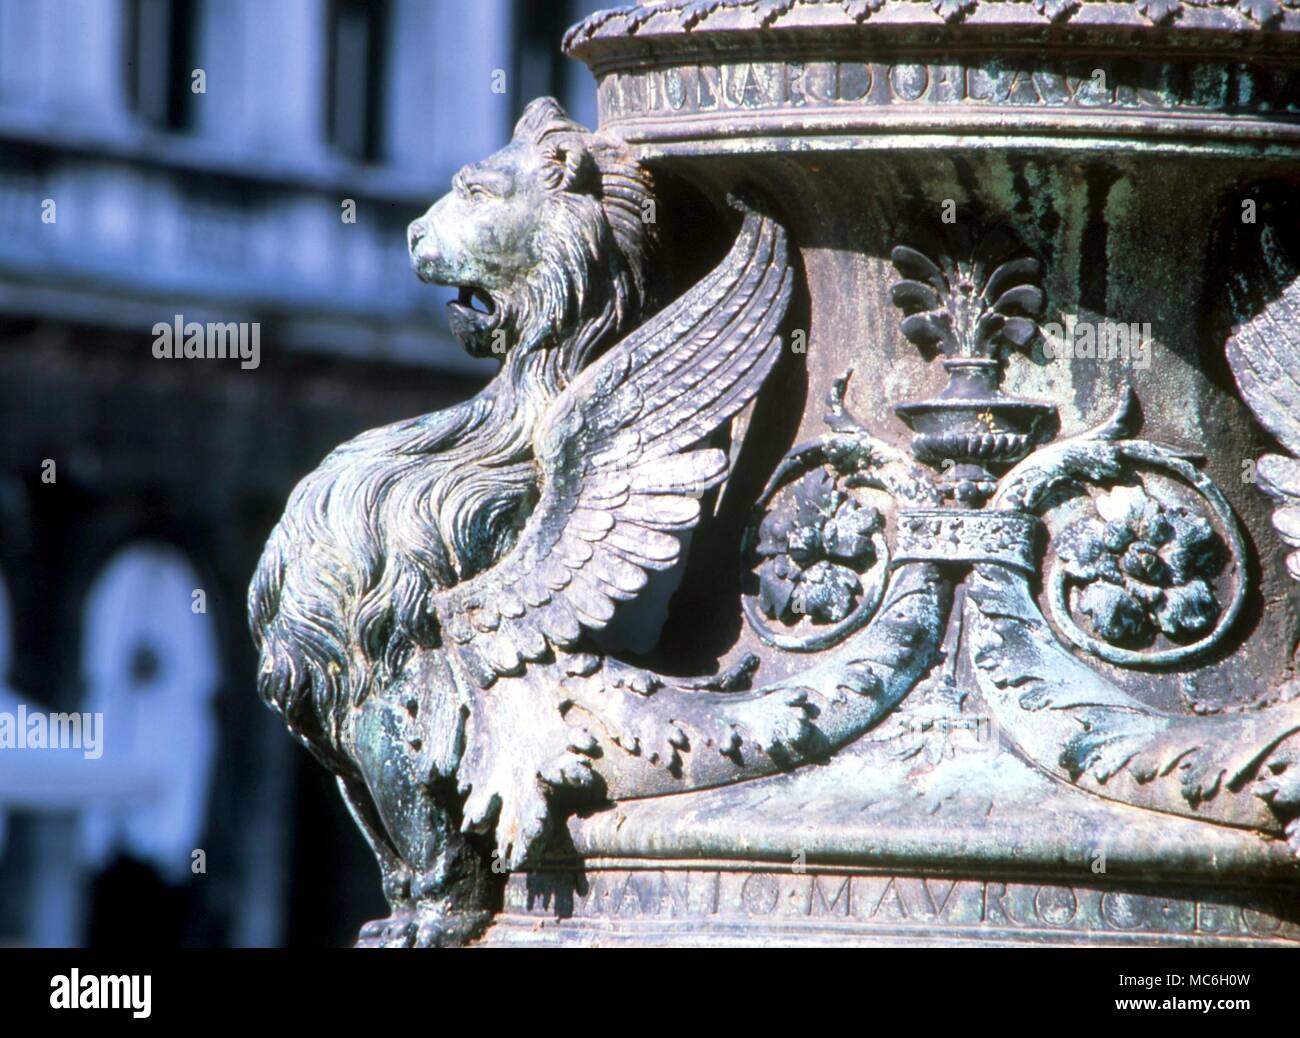 MONSTERS - Lion-headed bird with curled tail. Emblem on lamp post in San Marco Square, Venice Stock Photo